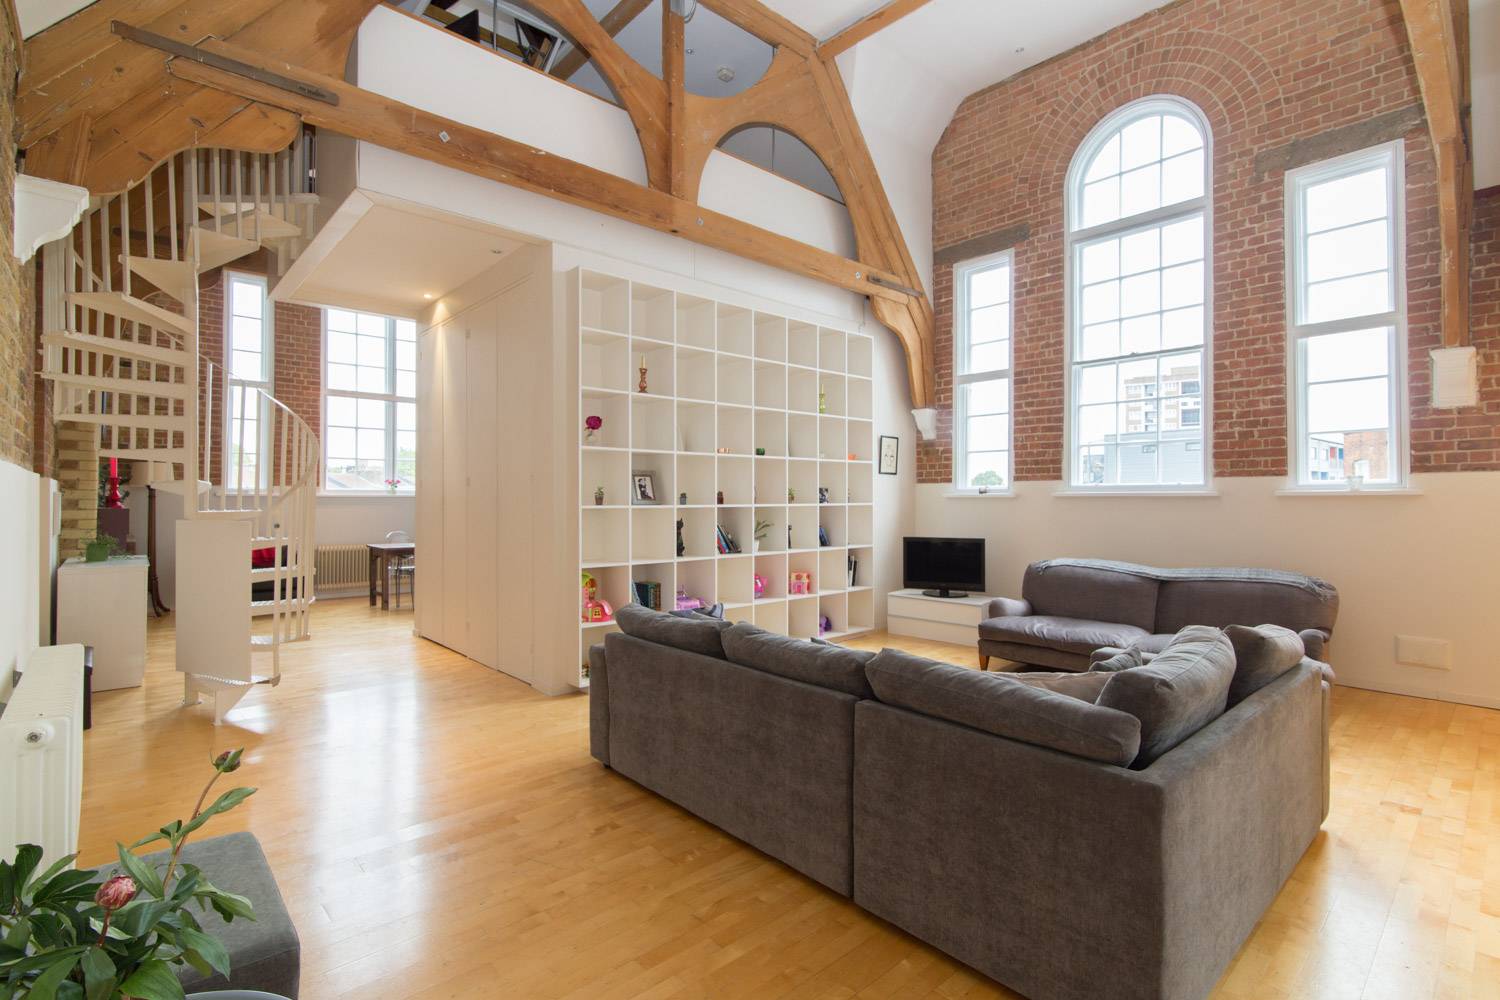 Amazing, vast top floor loft apartment with huge ceilings, loads of character and private roof terrace. Flexible layout and secured parking in superb location.